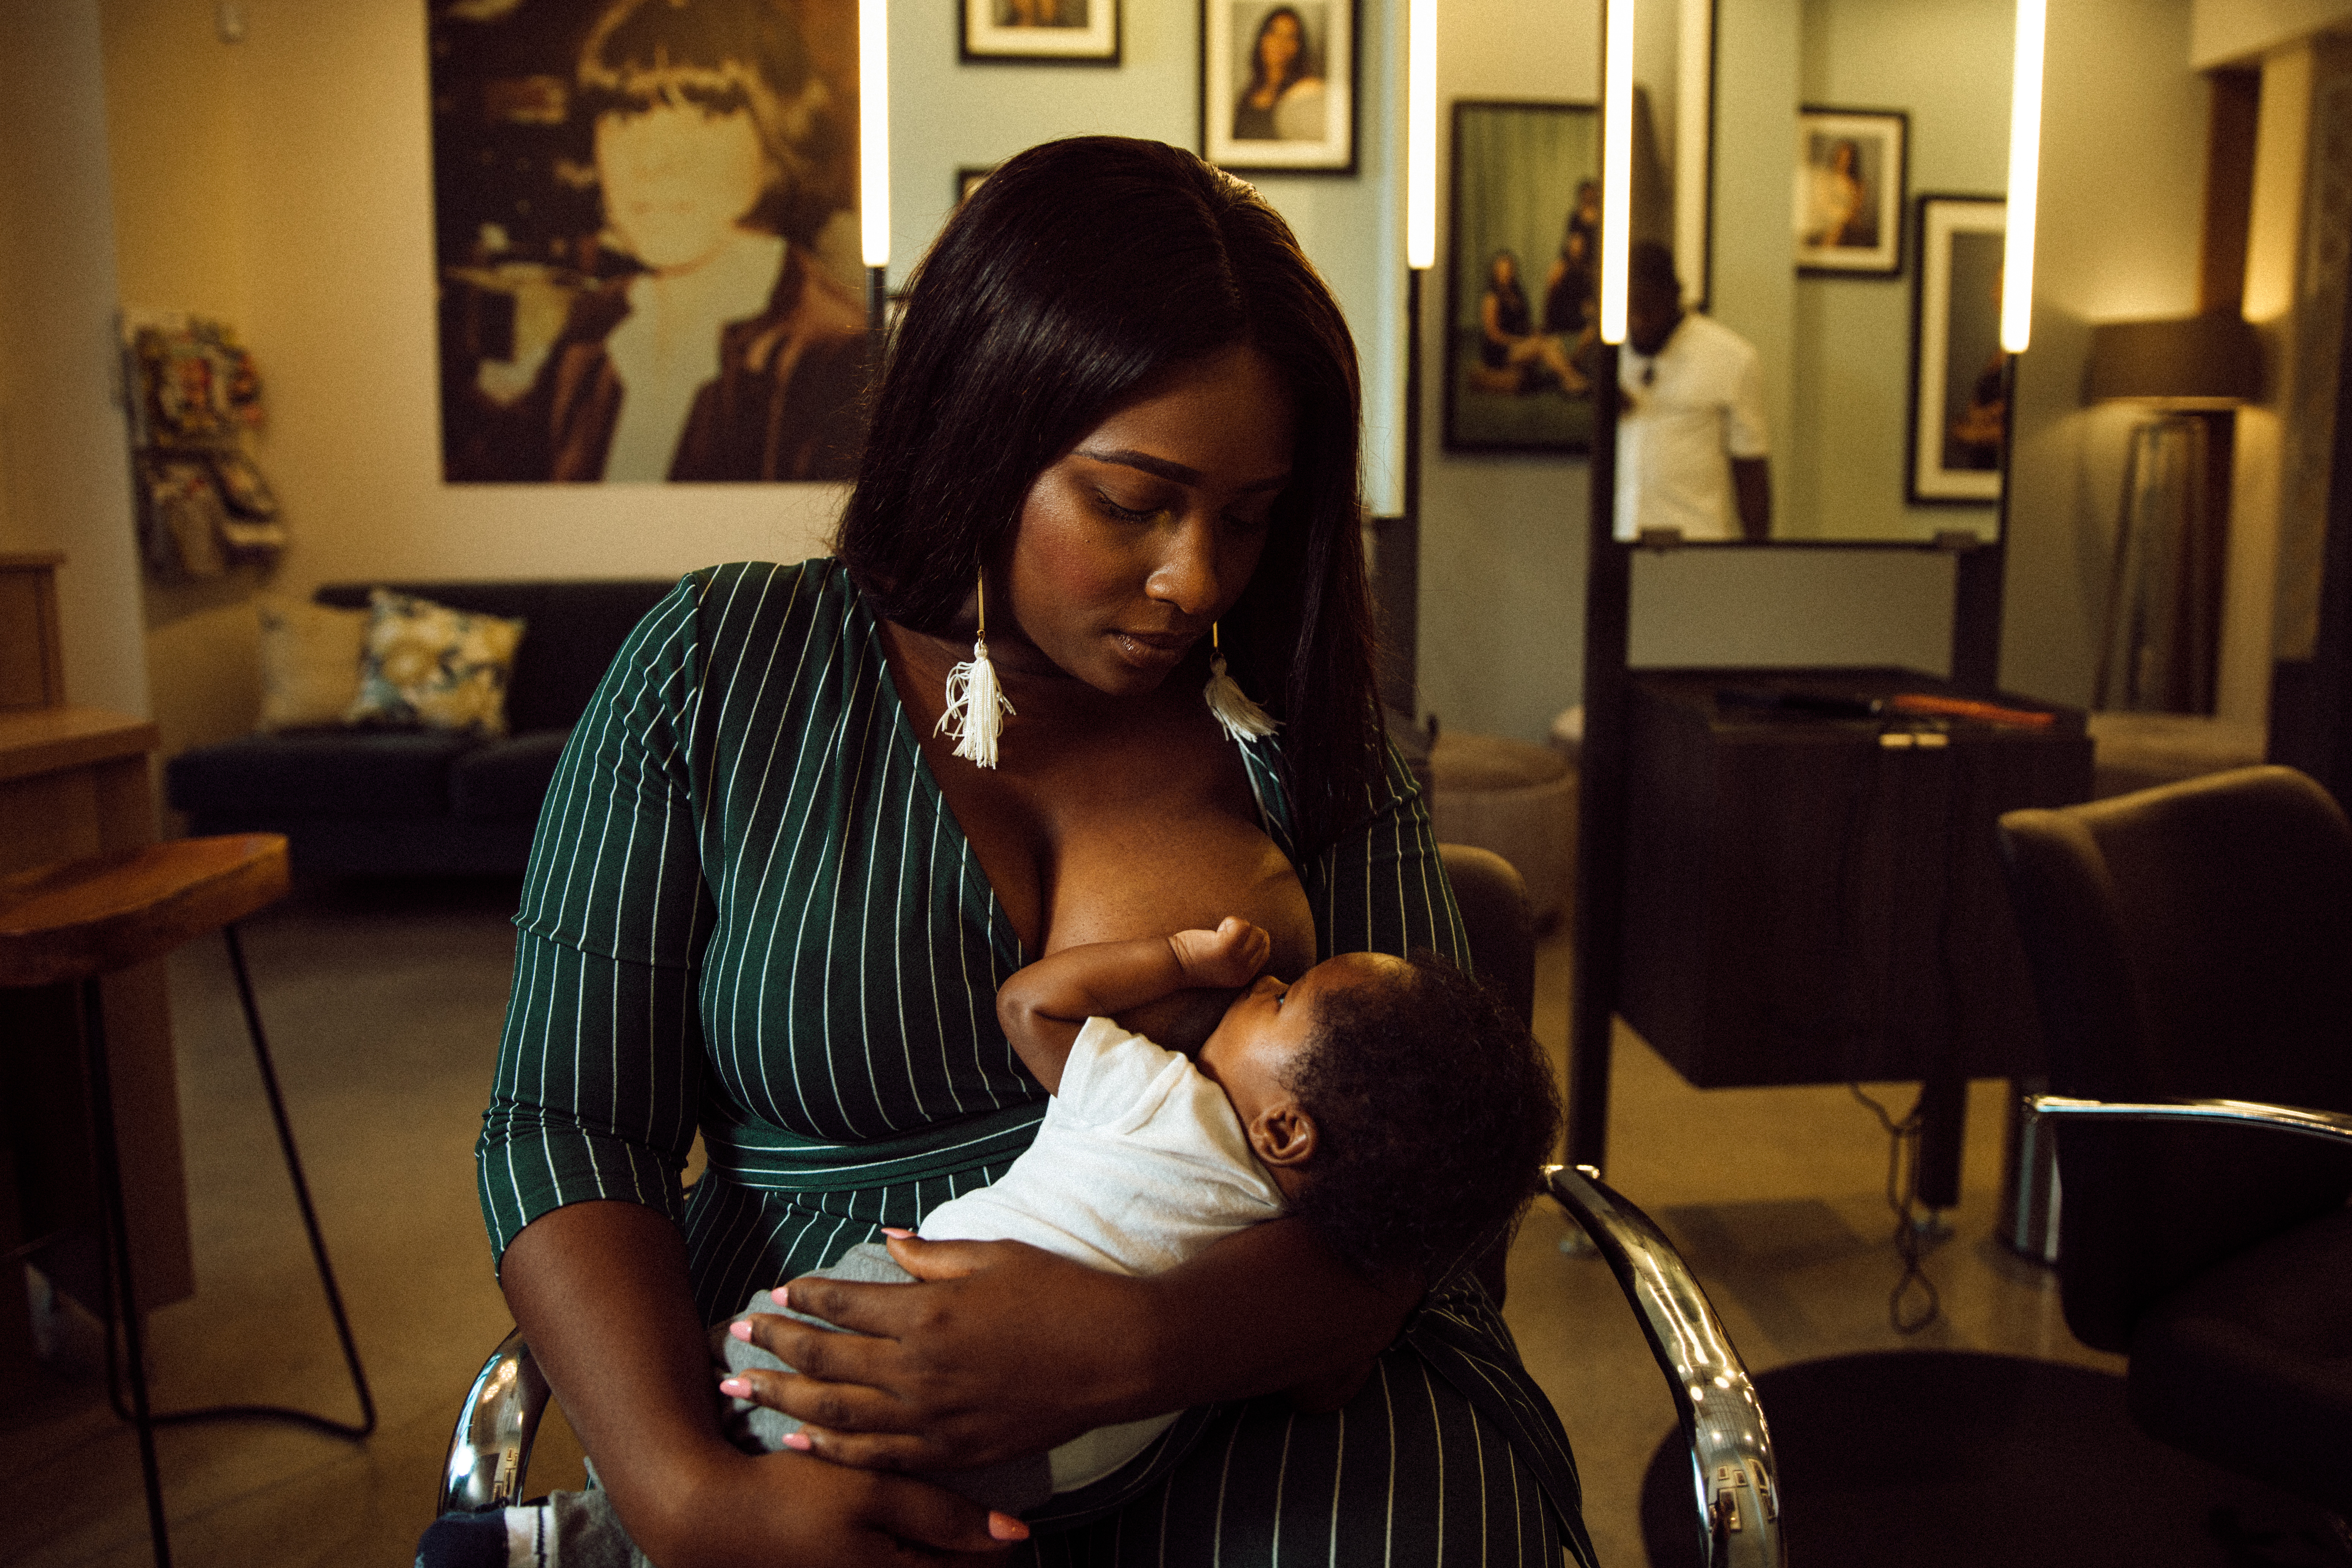 Diamond Massey breastfeeds her infant child while sitting in a hair salon chair.